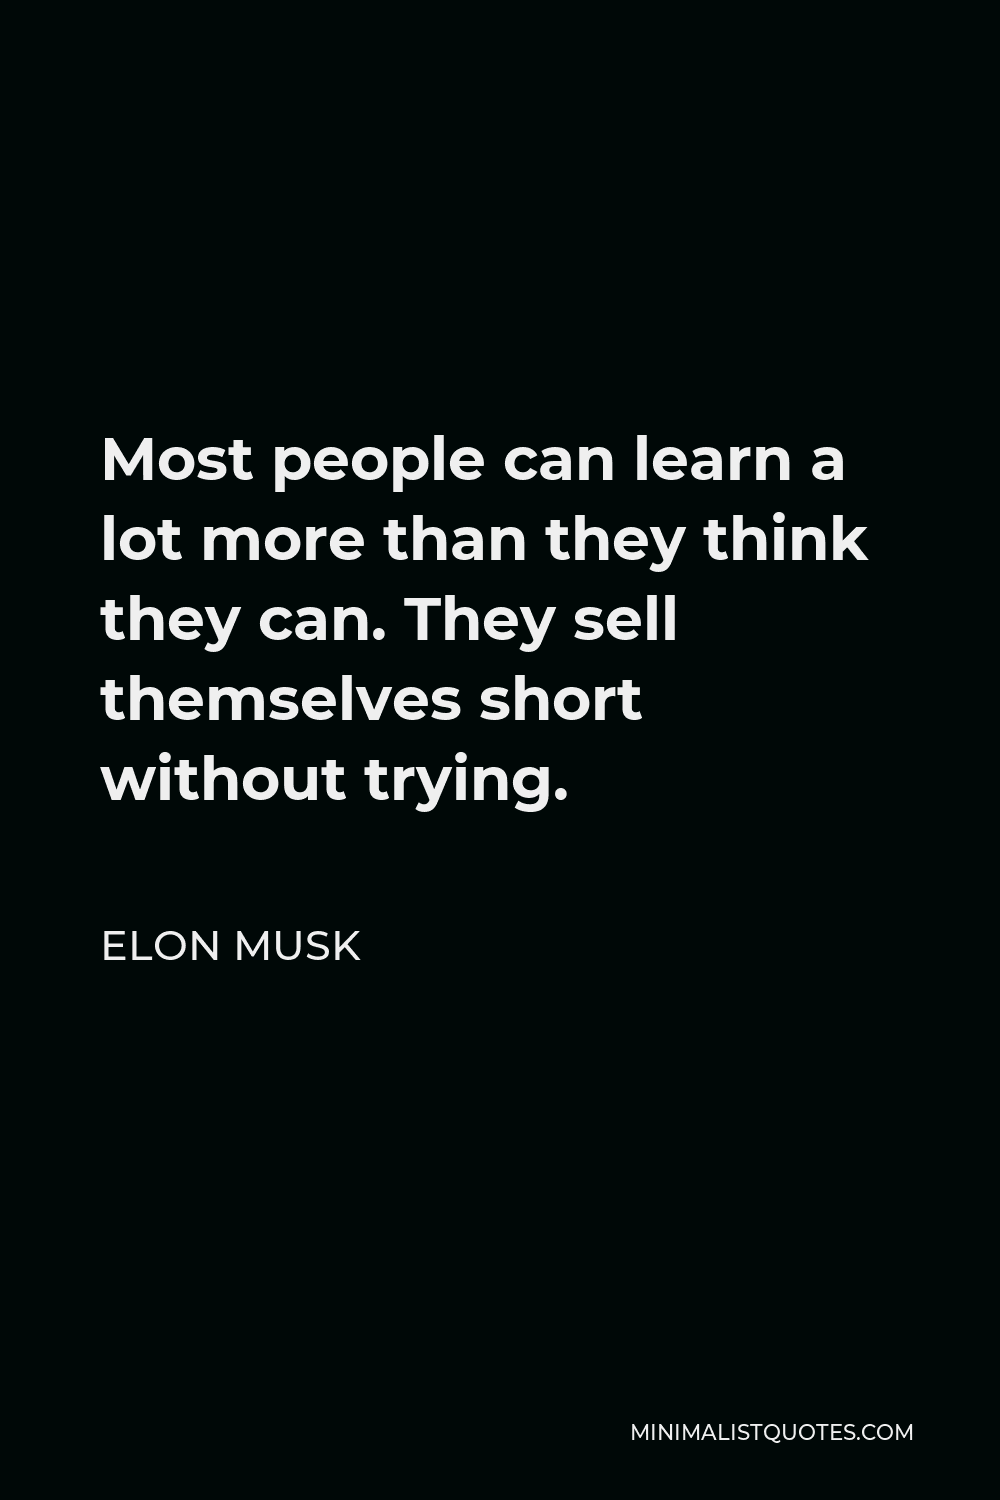 Elon Musk Quote - Most people can learn a lot more than they think they can. They sell themselves short without trying.